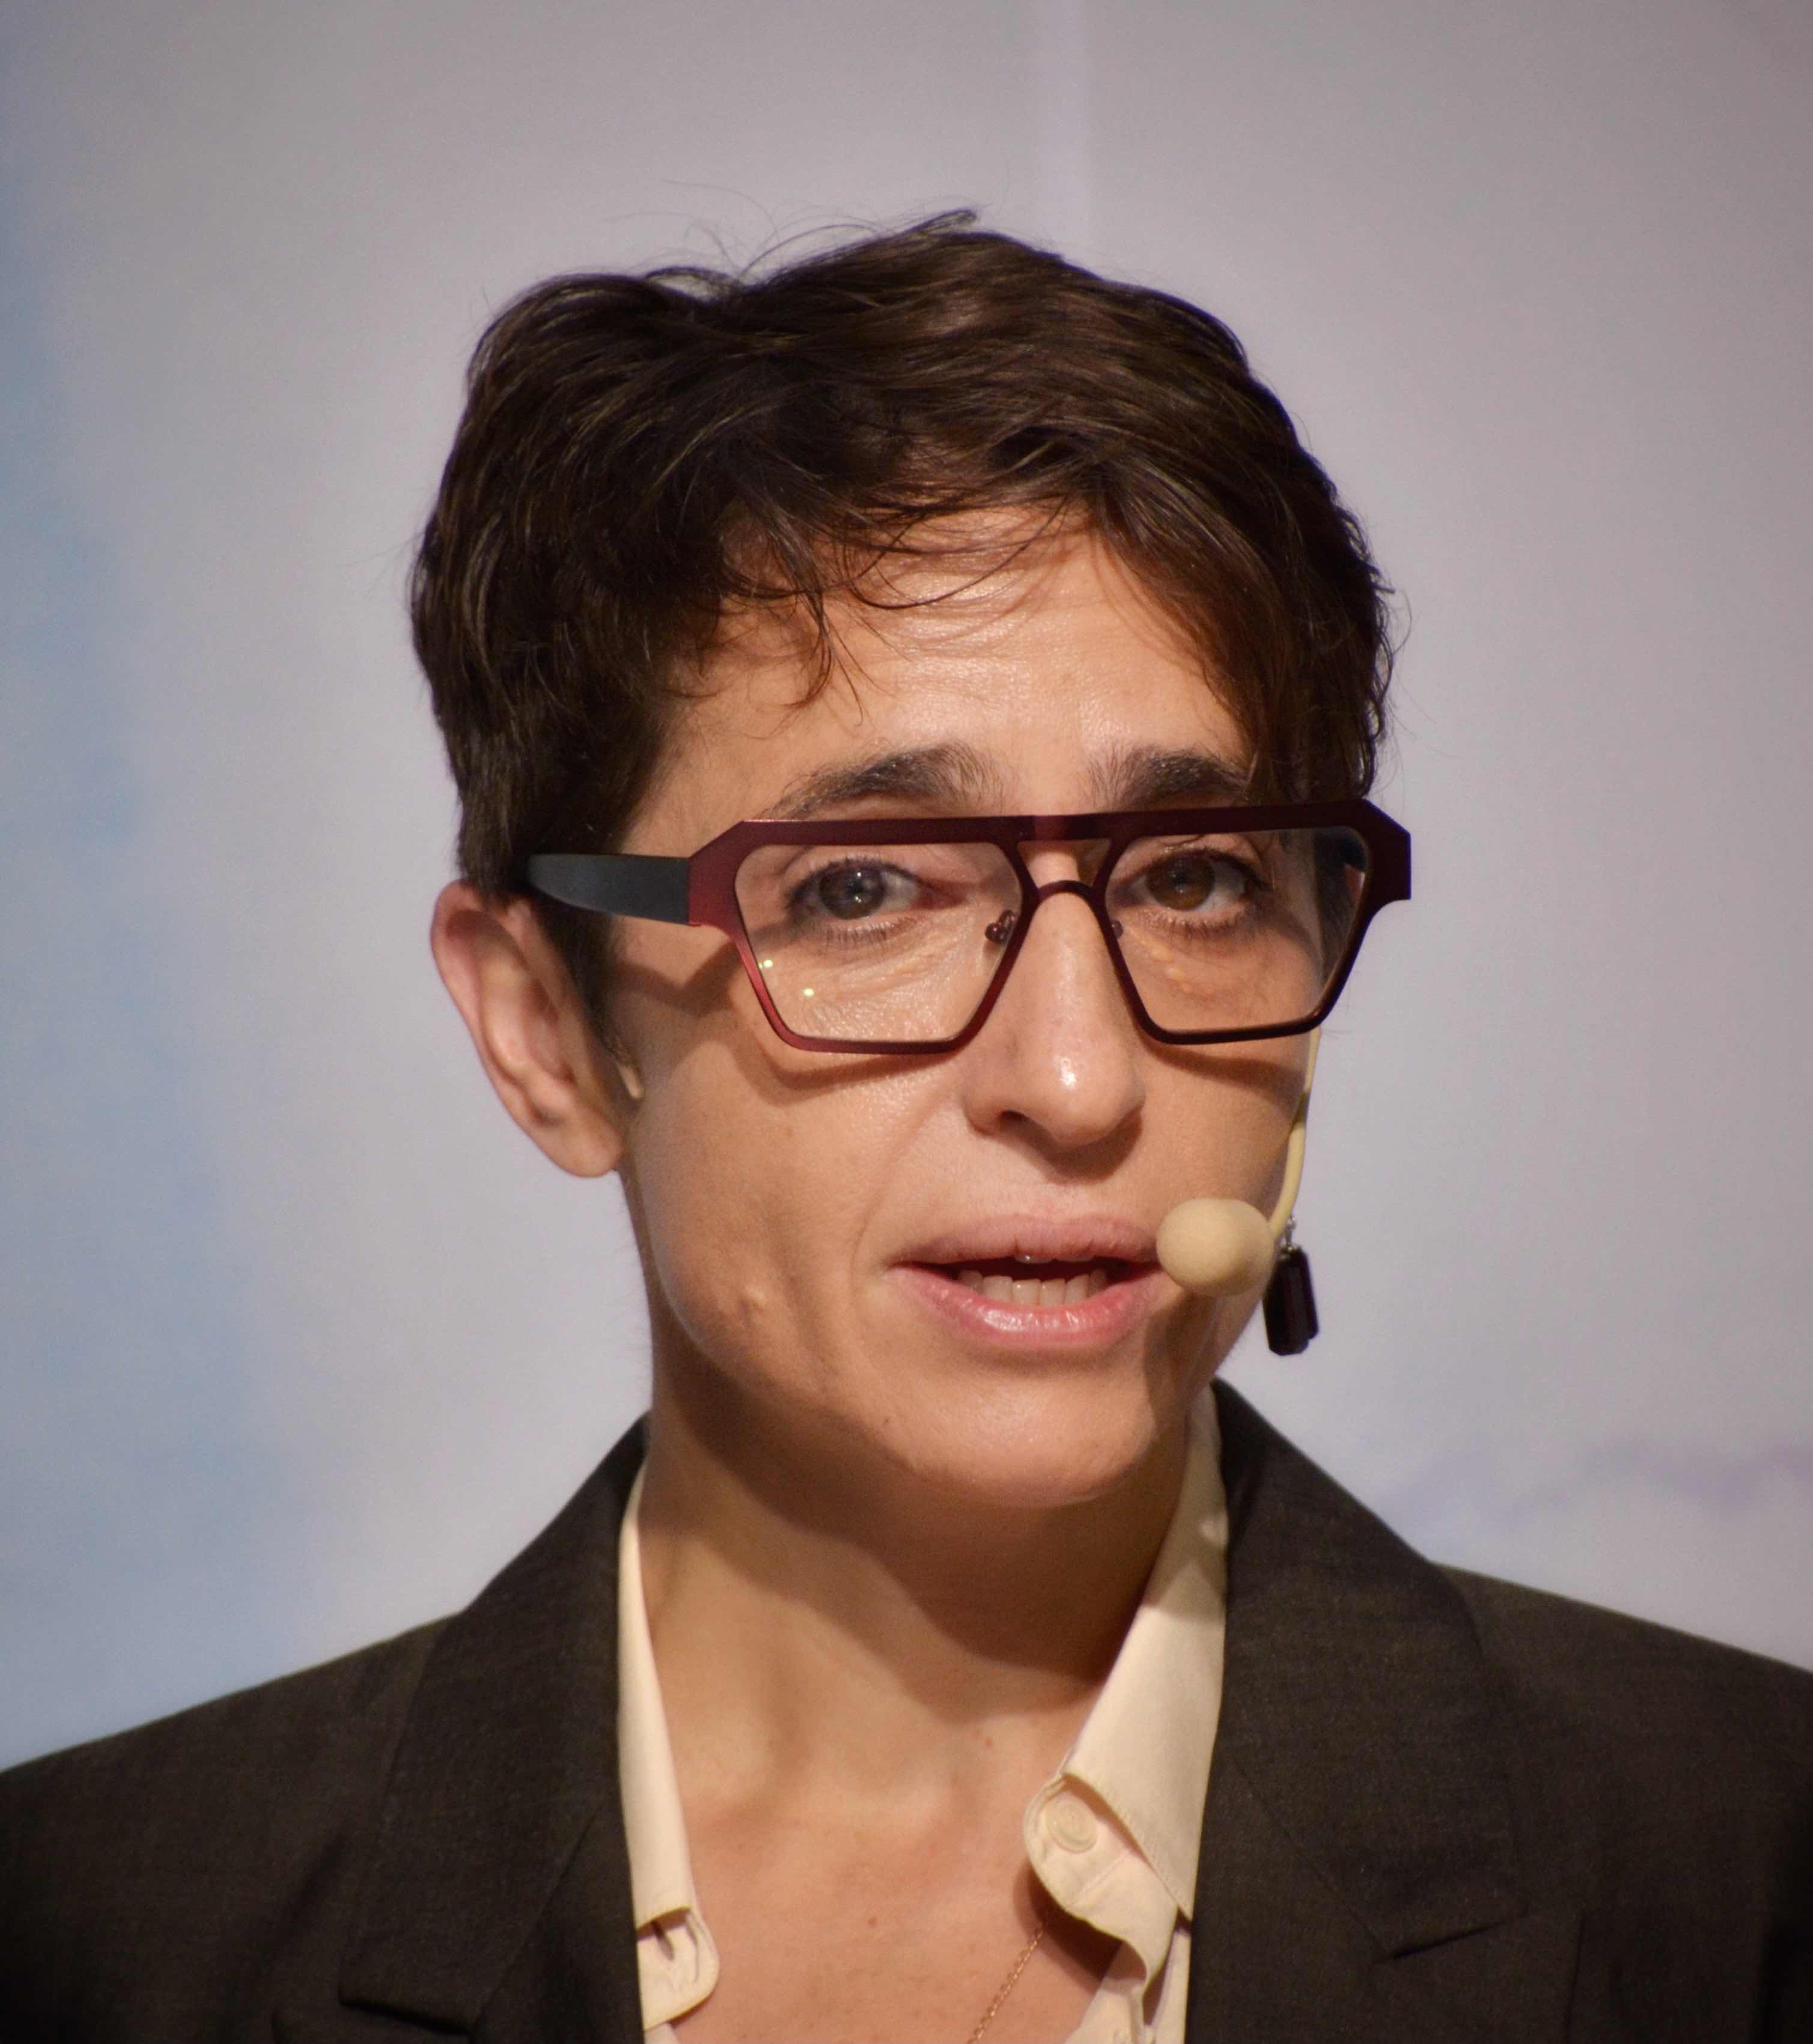 Masha Gessen: The Courage to Leave and the Courage to Stay